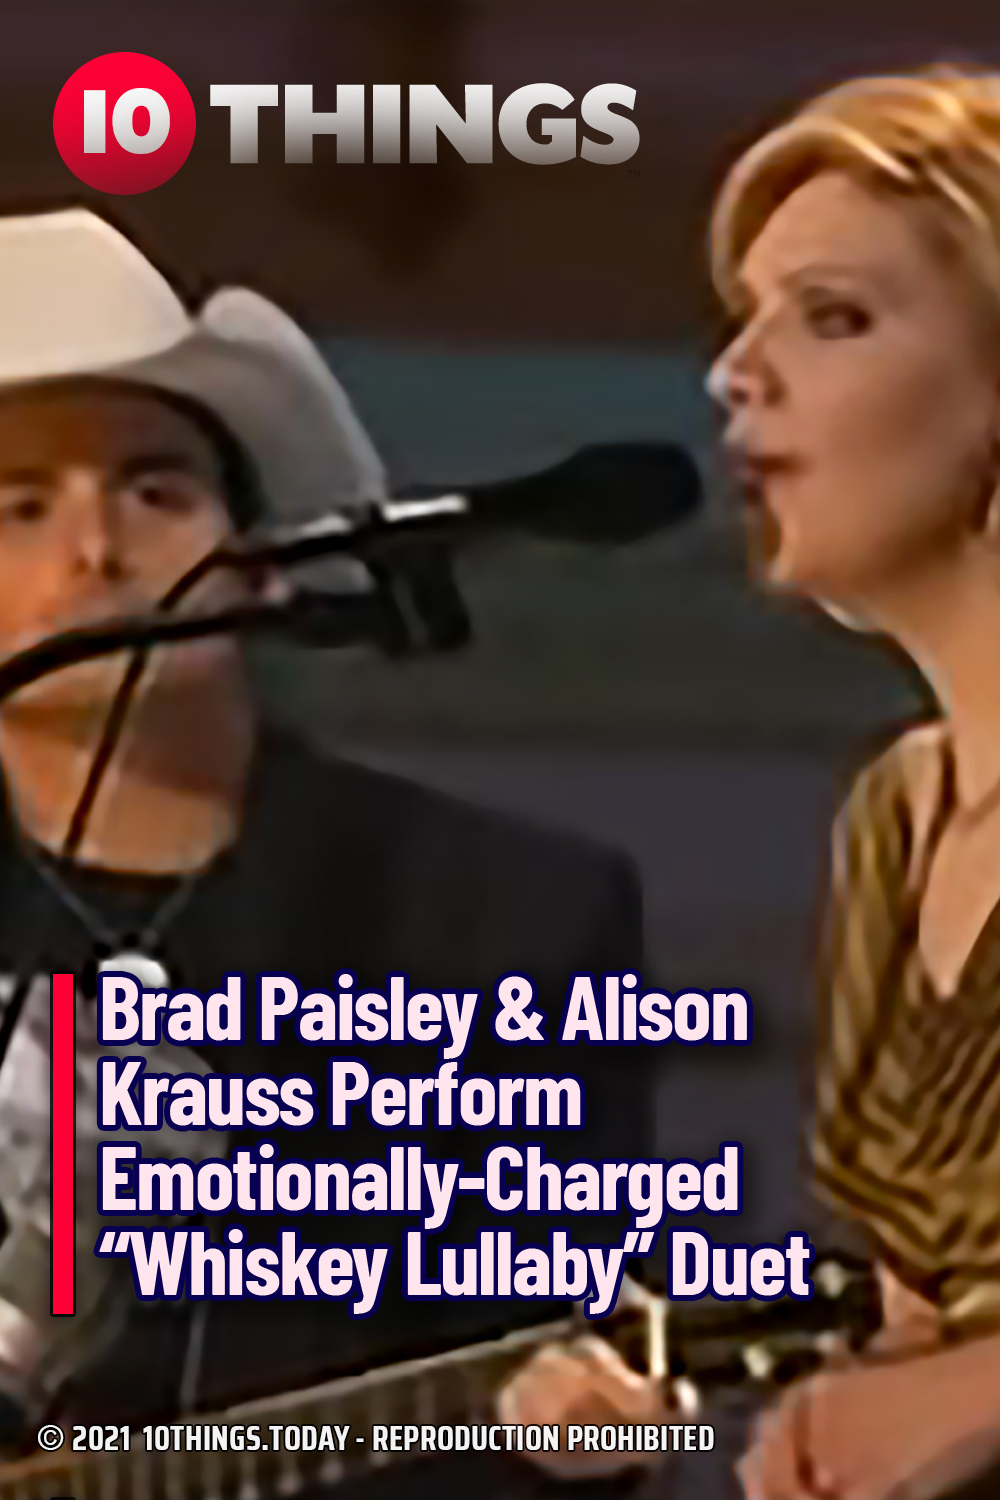 Brad Paisley & Alison Krauss Perform Emotionally-Charged “Whiskey Lullaby” Duet